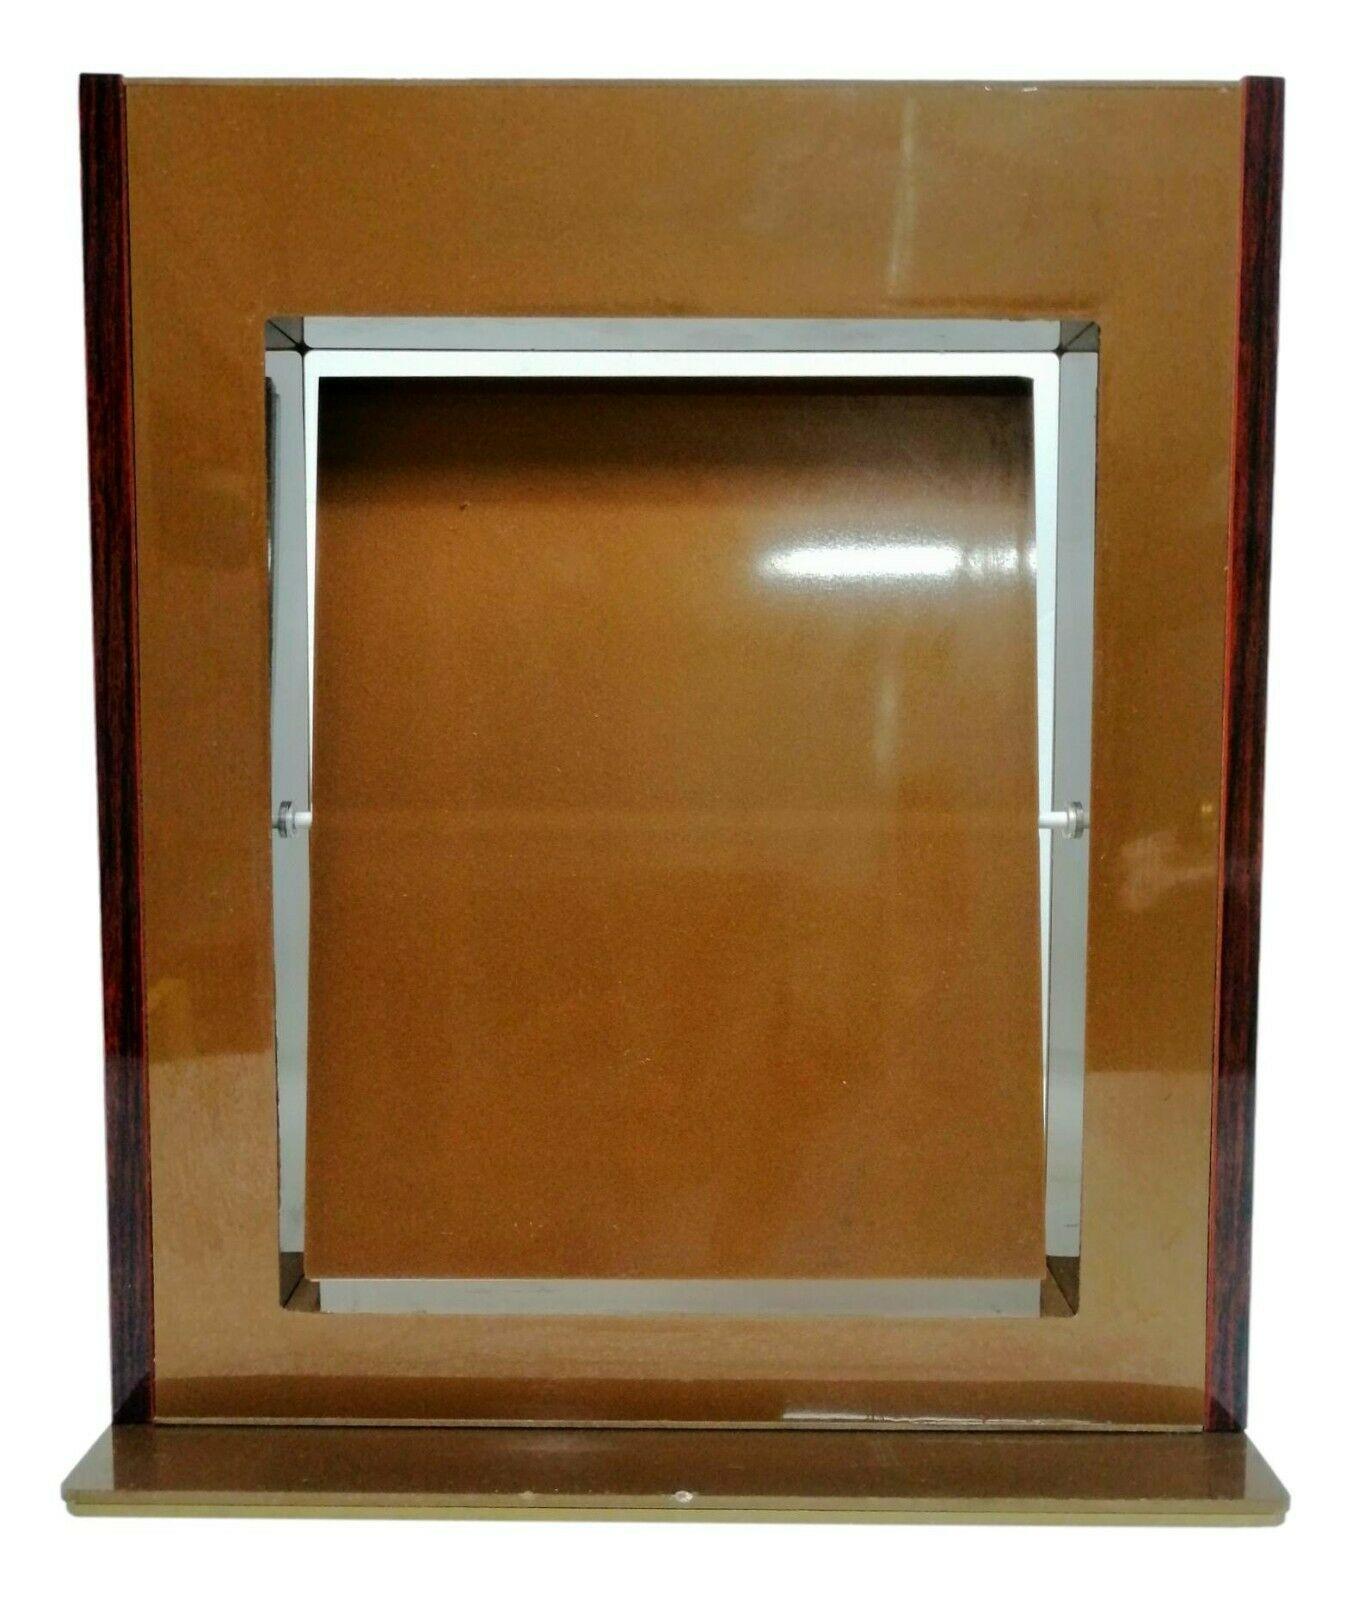 Original Gucci collectible mirror, made of brown metal with wooden finishes and distributed only to dealer shops of the brand, therefore impossible to find on the market

made of metal, with plexiglass base, measuring 31 cm in height, 26 cm in